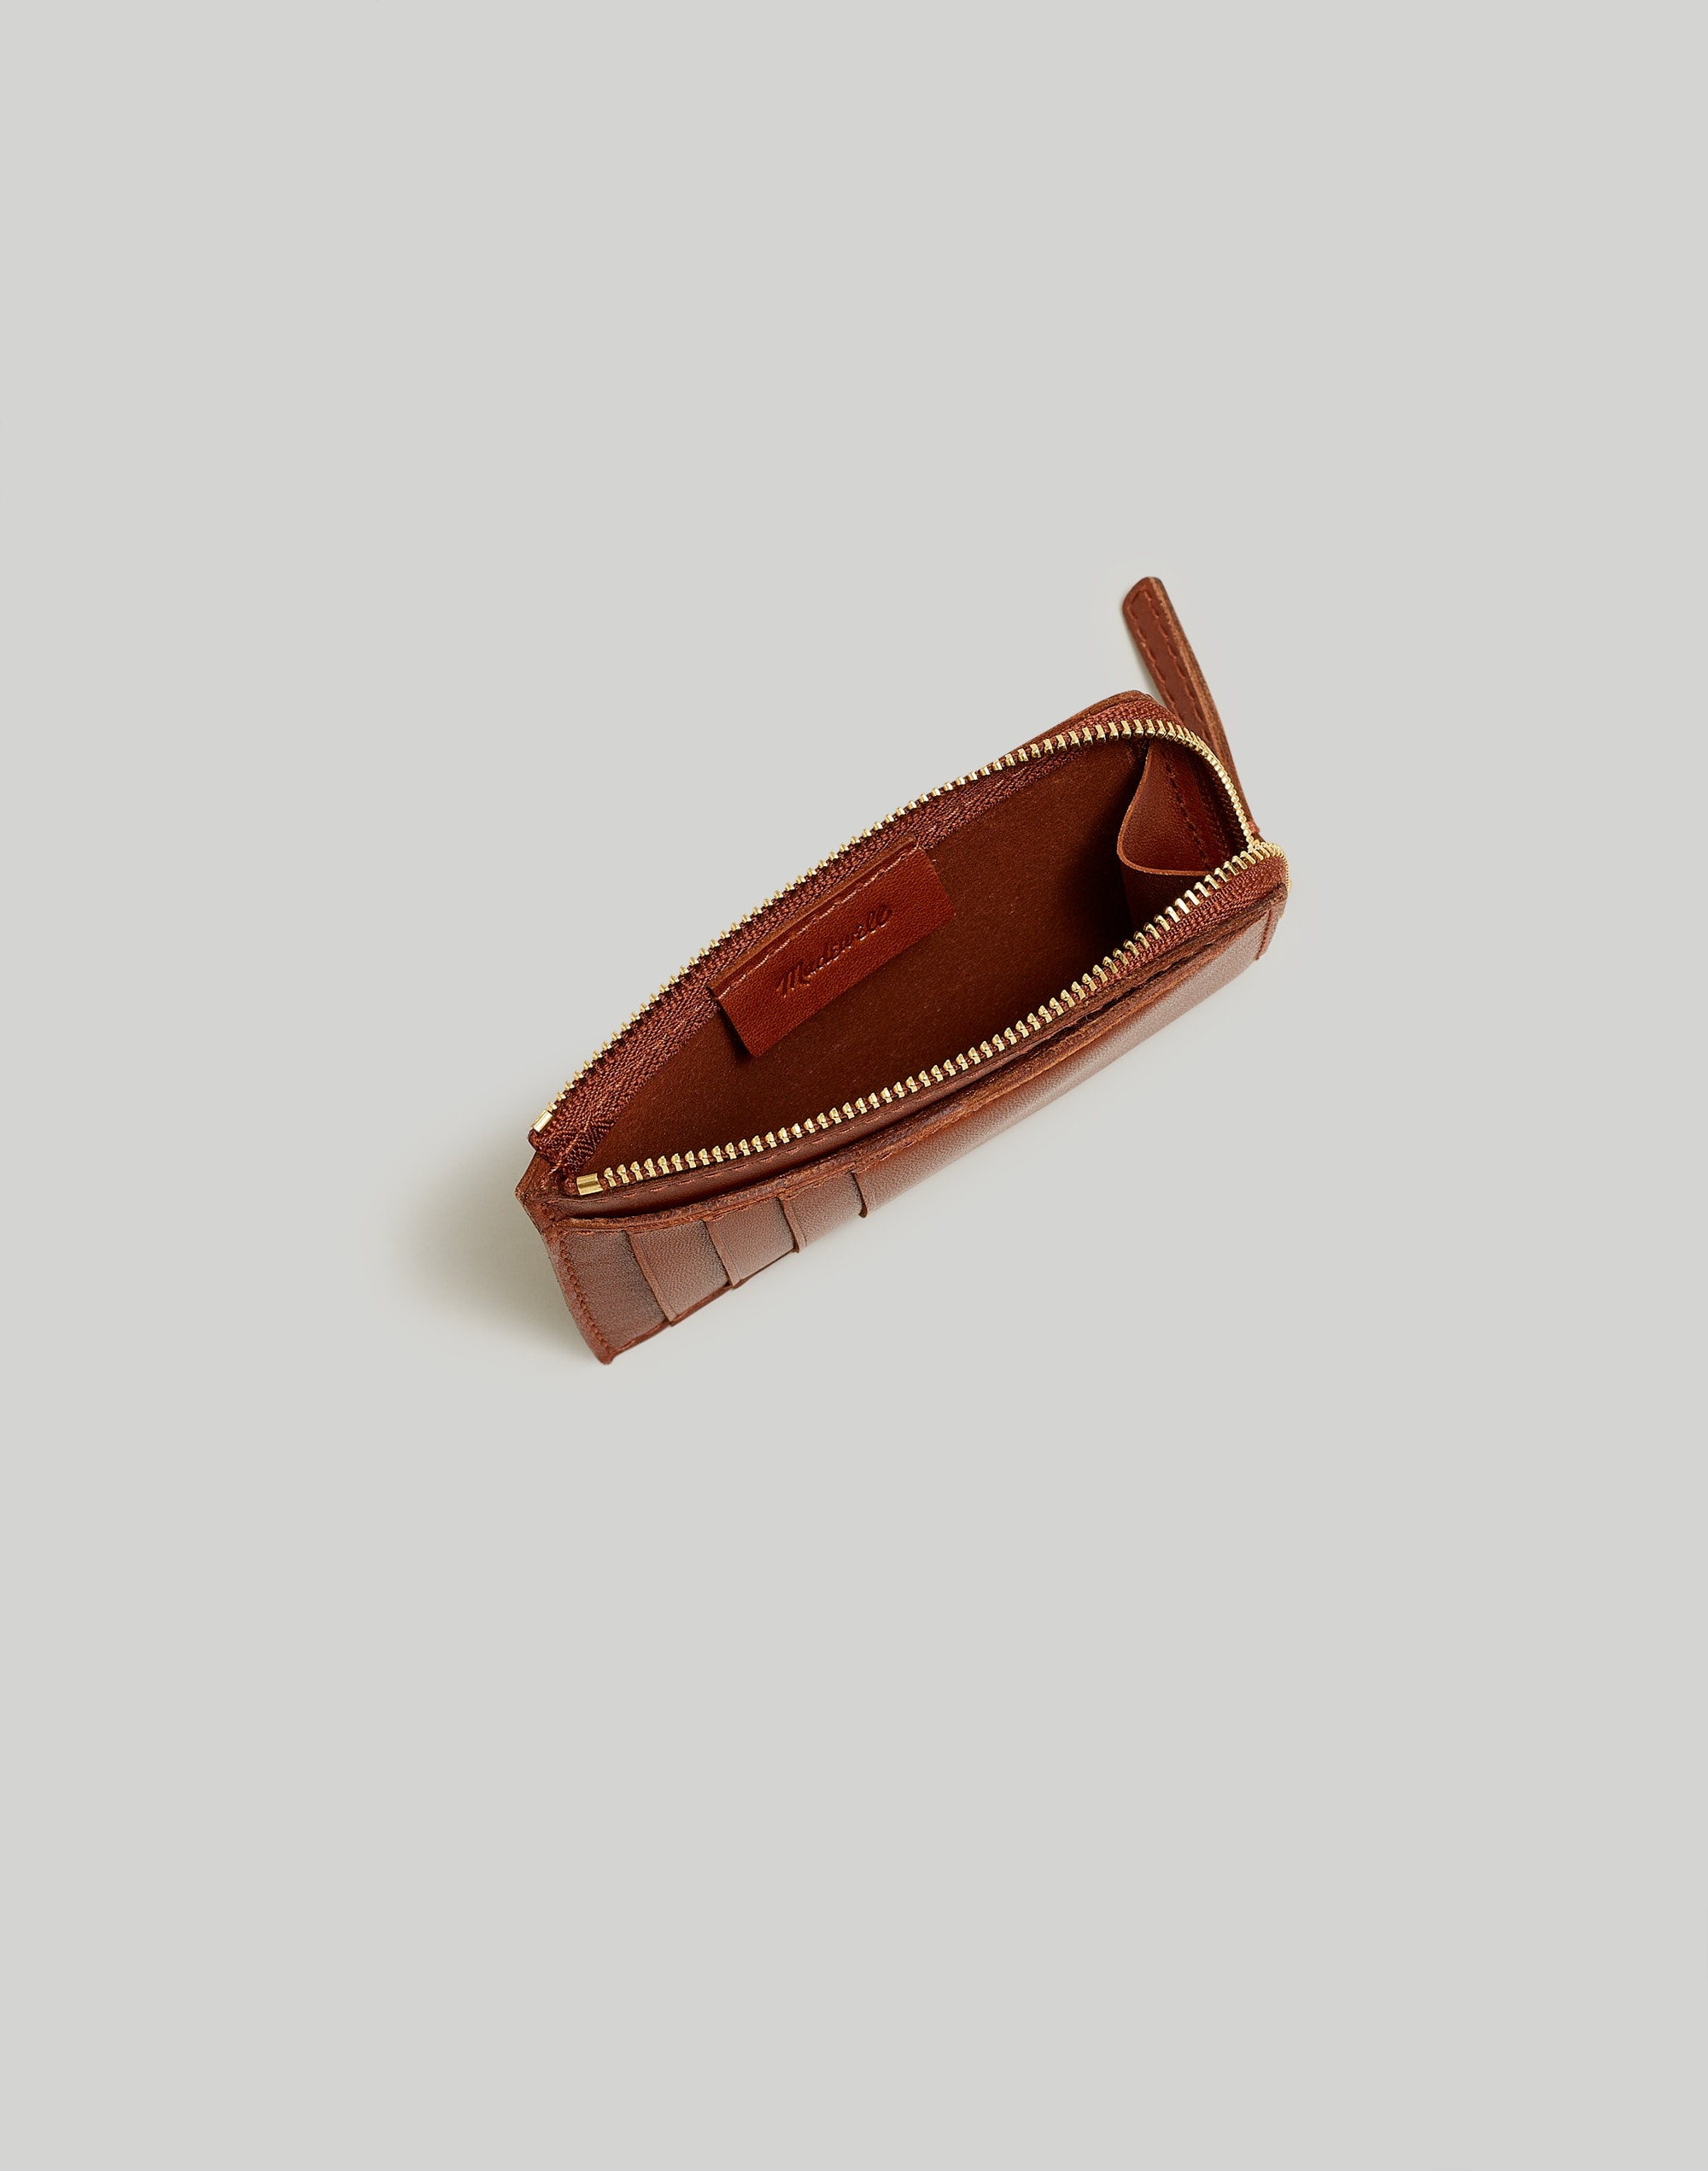 The Zip Card Case Wallet in Waxed Leather